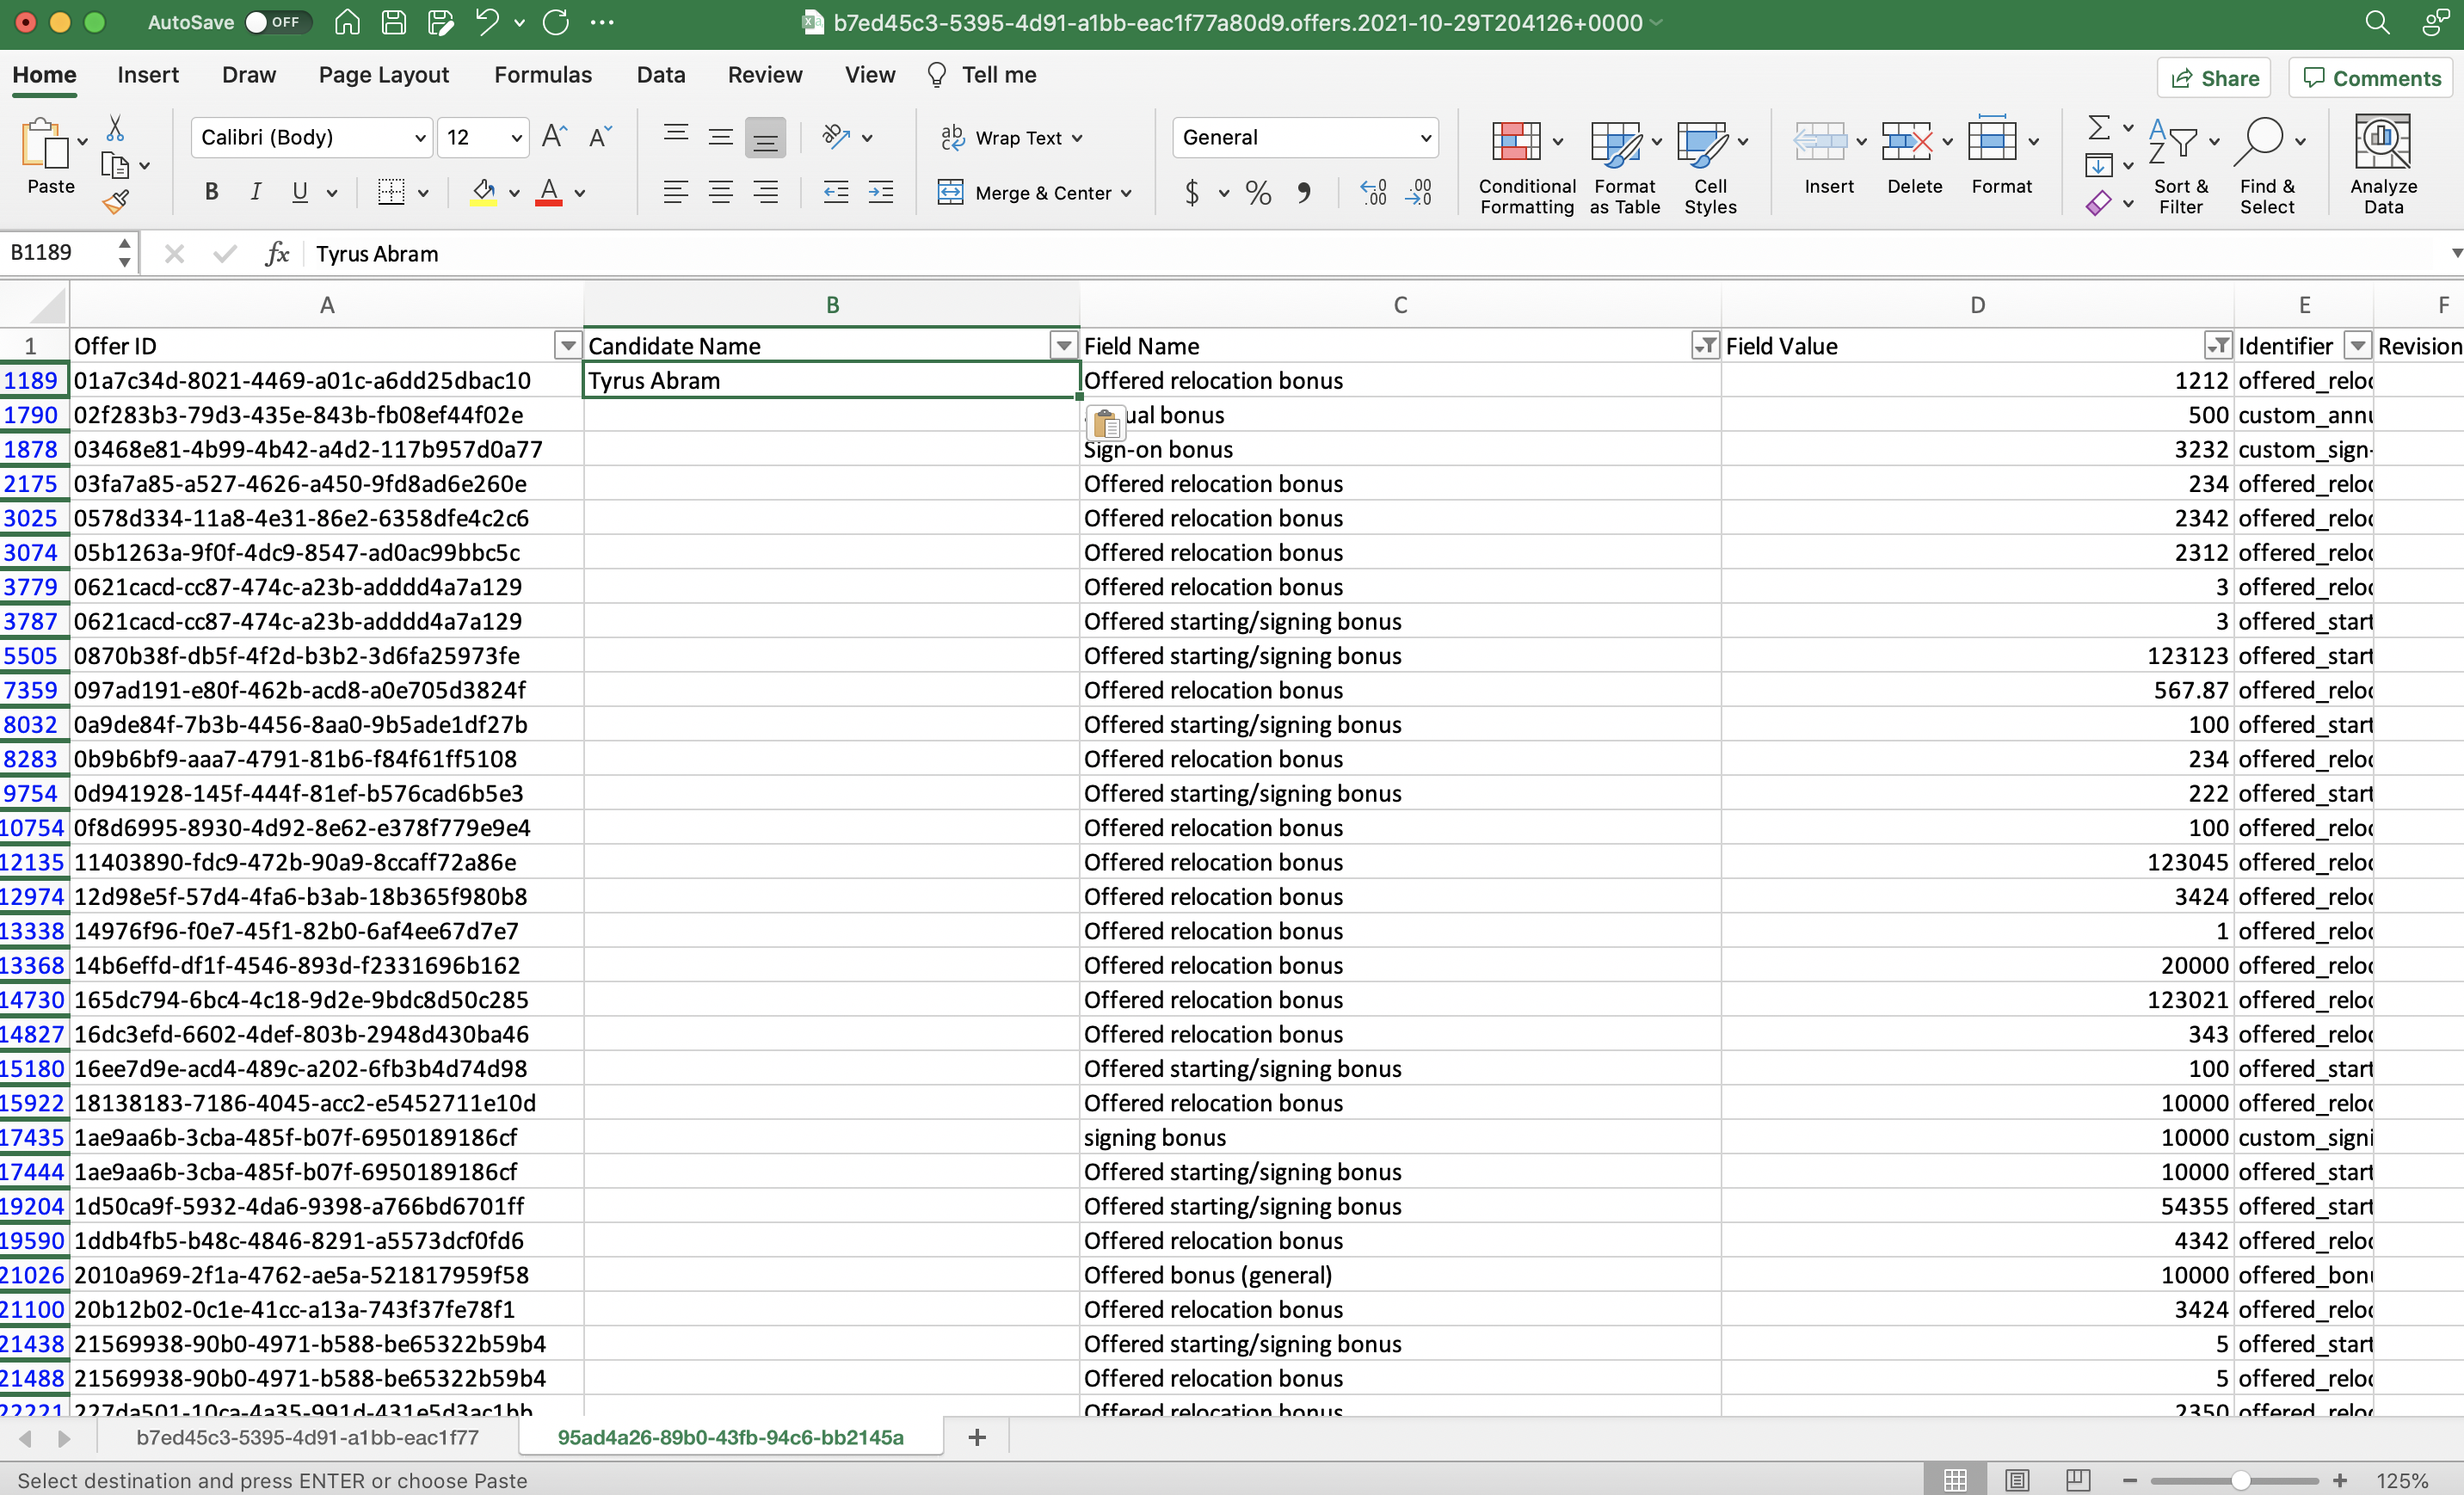 Contact name from previous image pasted into cell B1 on Offers custom fields spreadsheet.